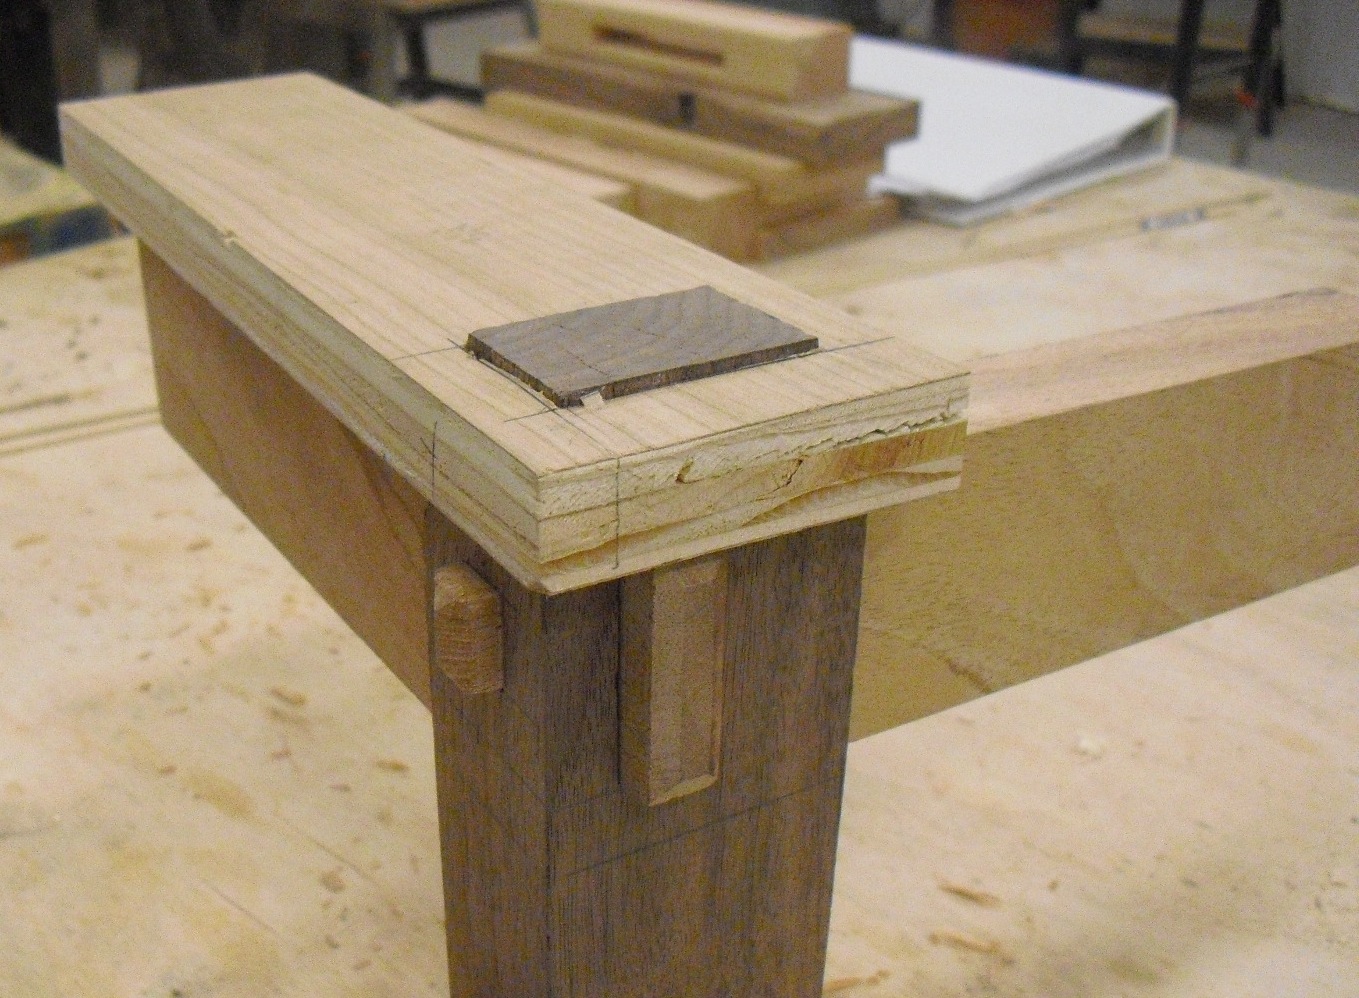 Let's Talk Wood: Mortise and Tenon Joints